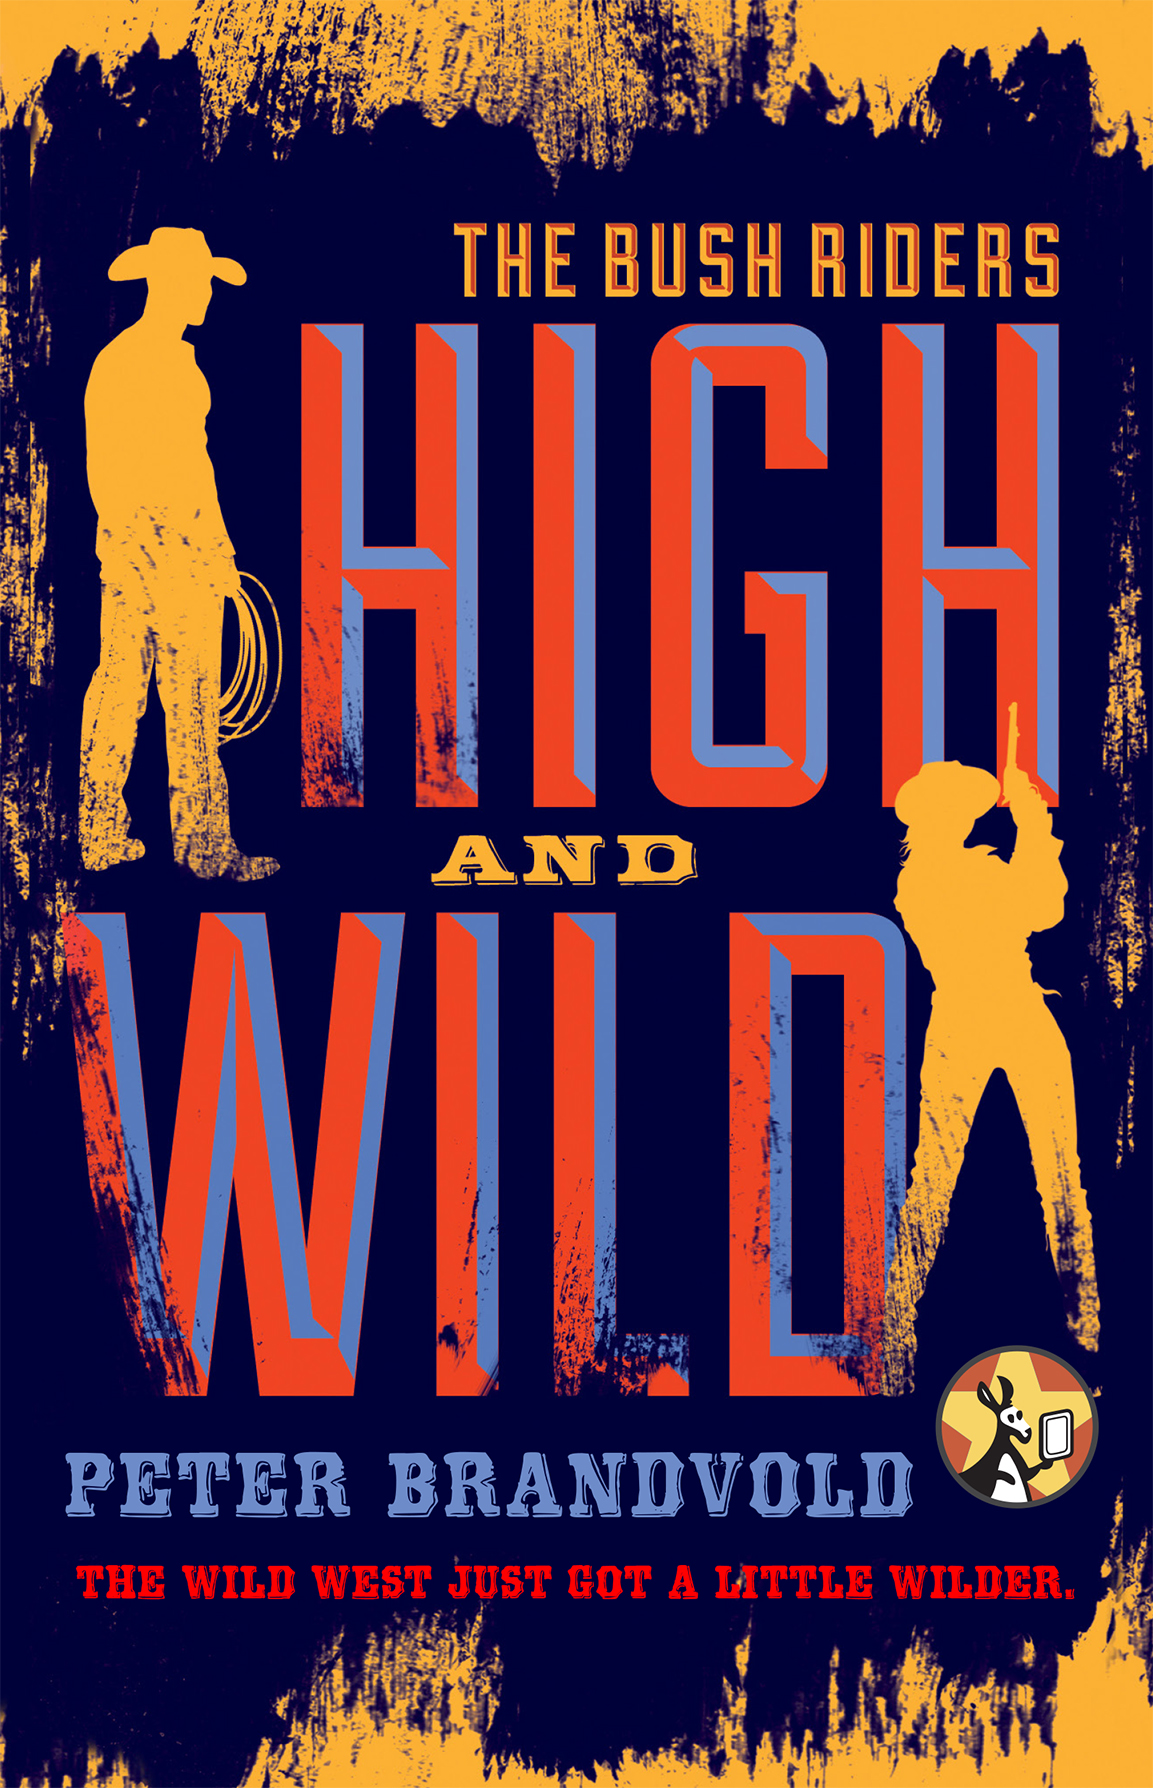 High and Wild by Peter Brandvold